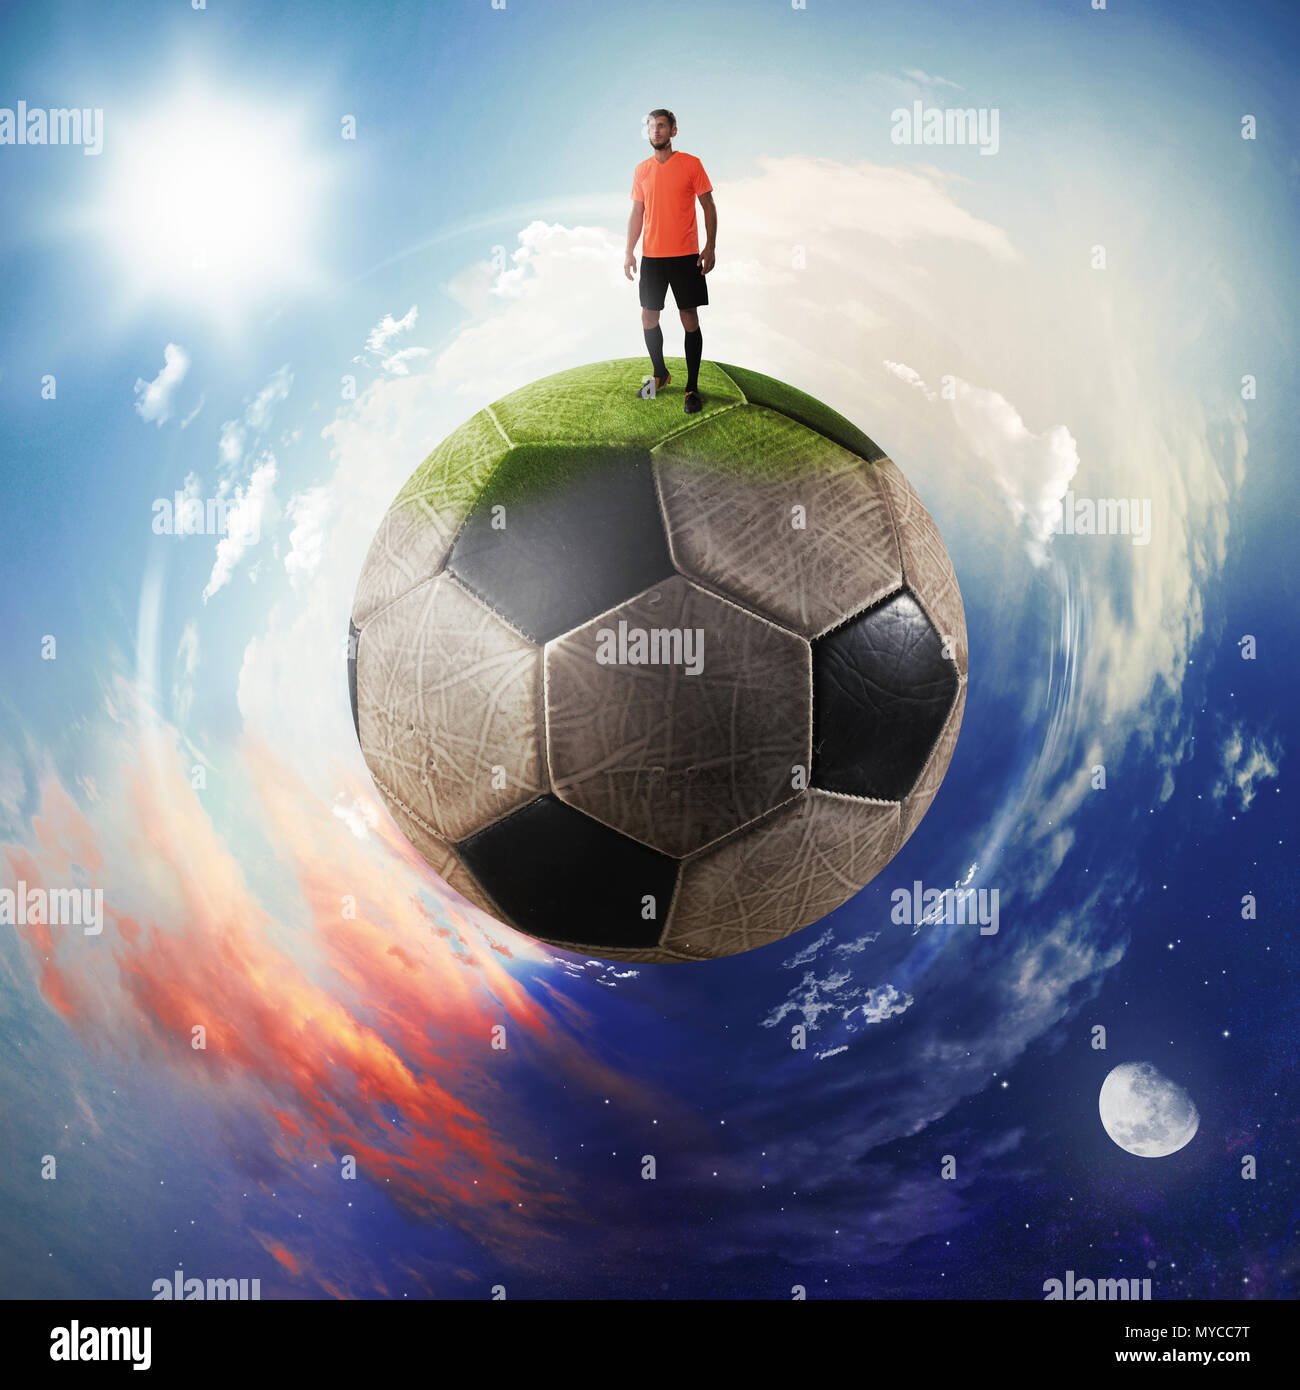 Football player in a soccer ball planet Stock Photo